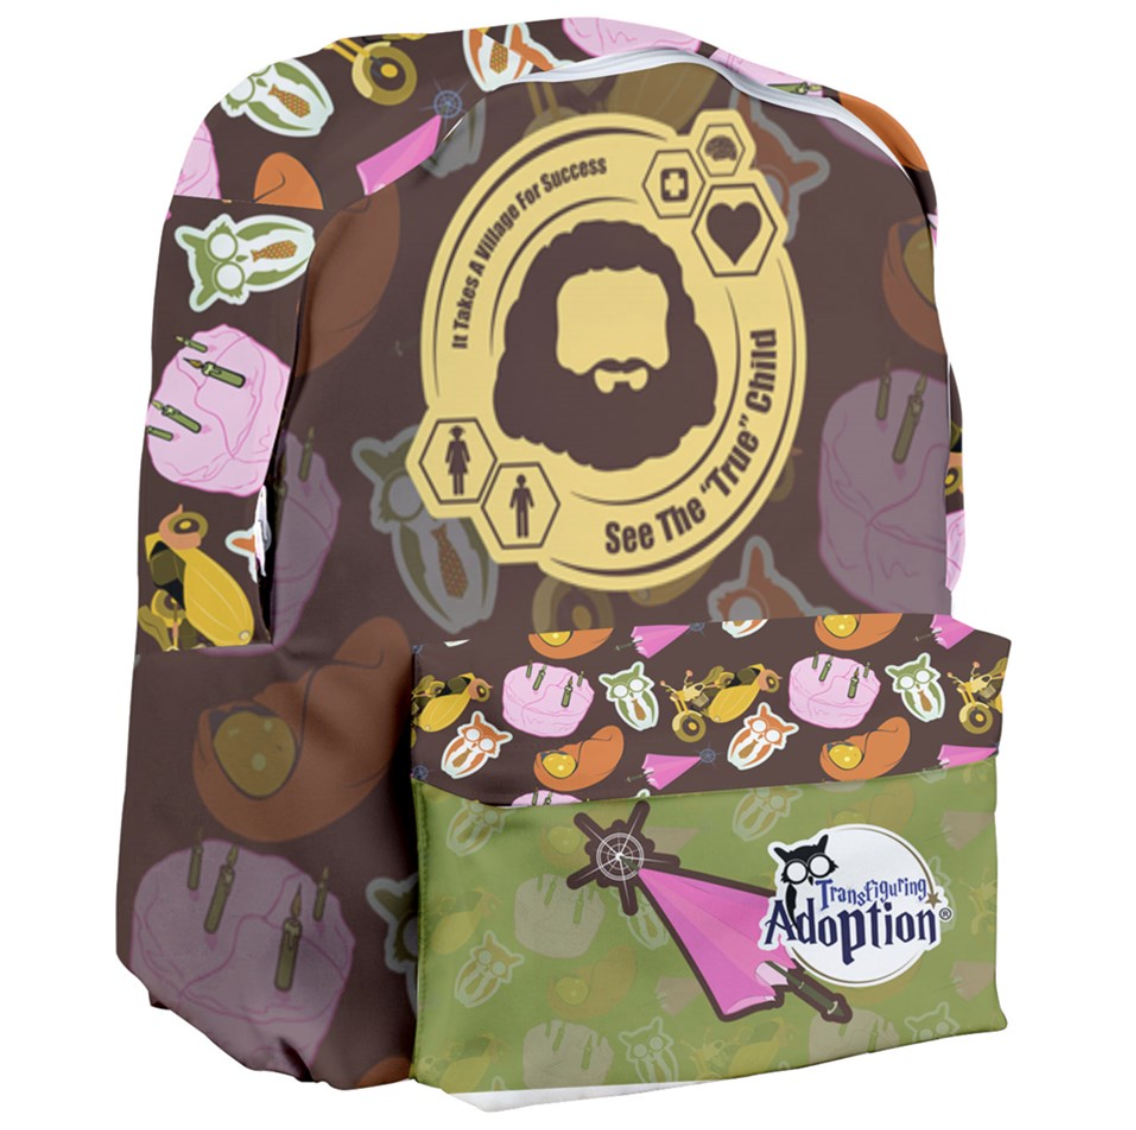 See The "TRUE" Child Giant Backpack - Inspired by literary character, Hagrid 